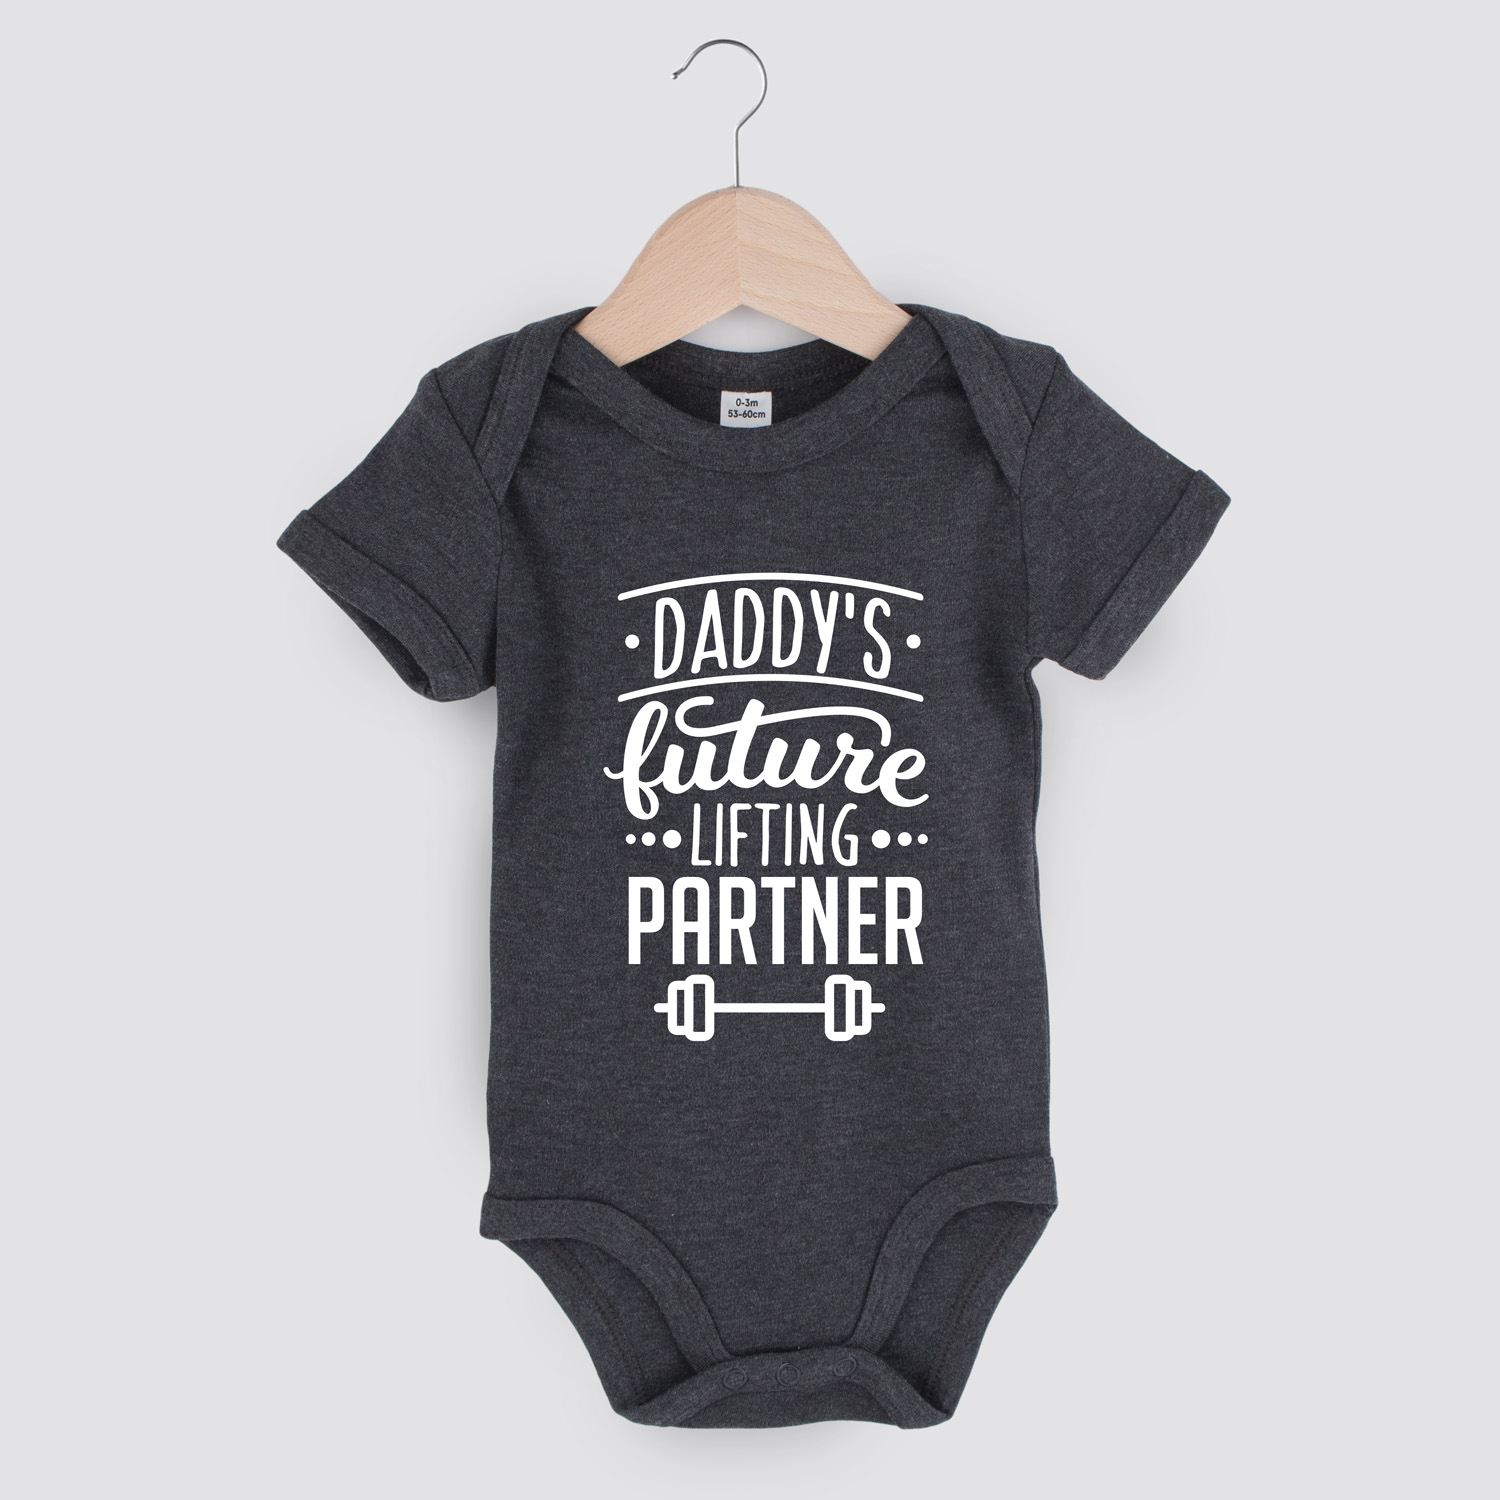 Strippen weerstand Bouwen Daddy's future lifting partner | Baby romper - babycomingsoon.be